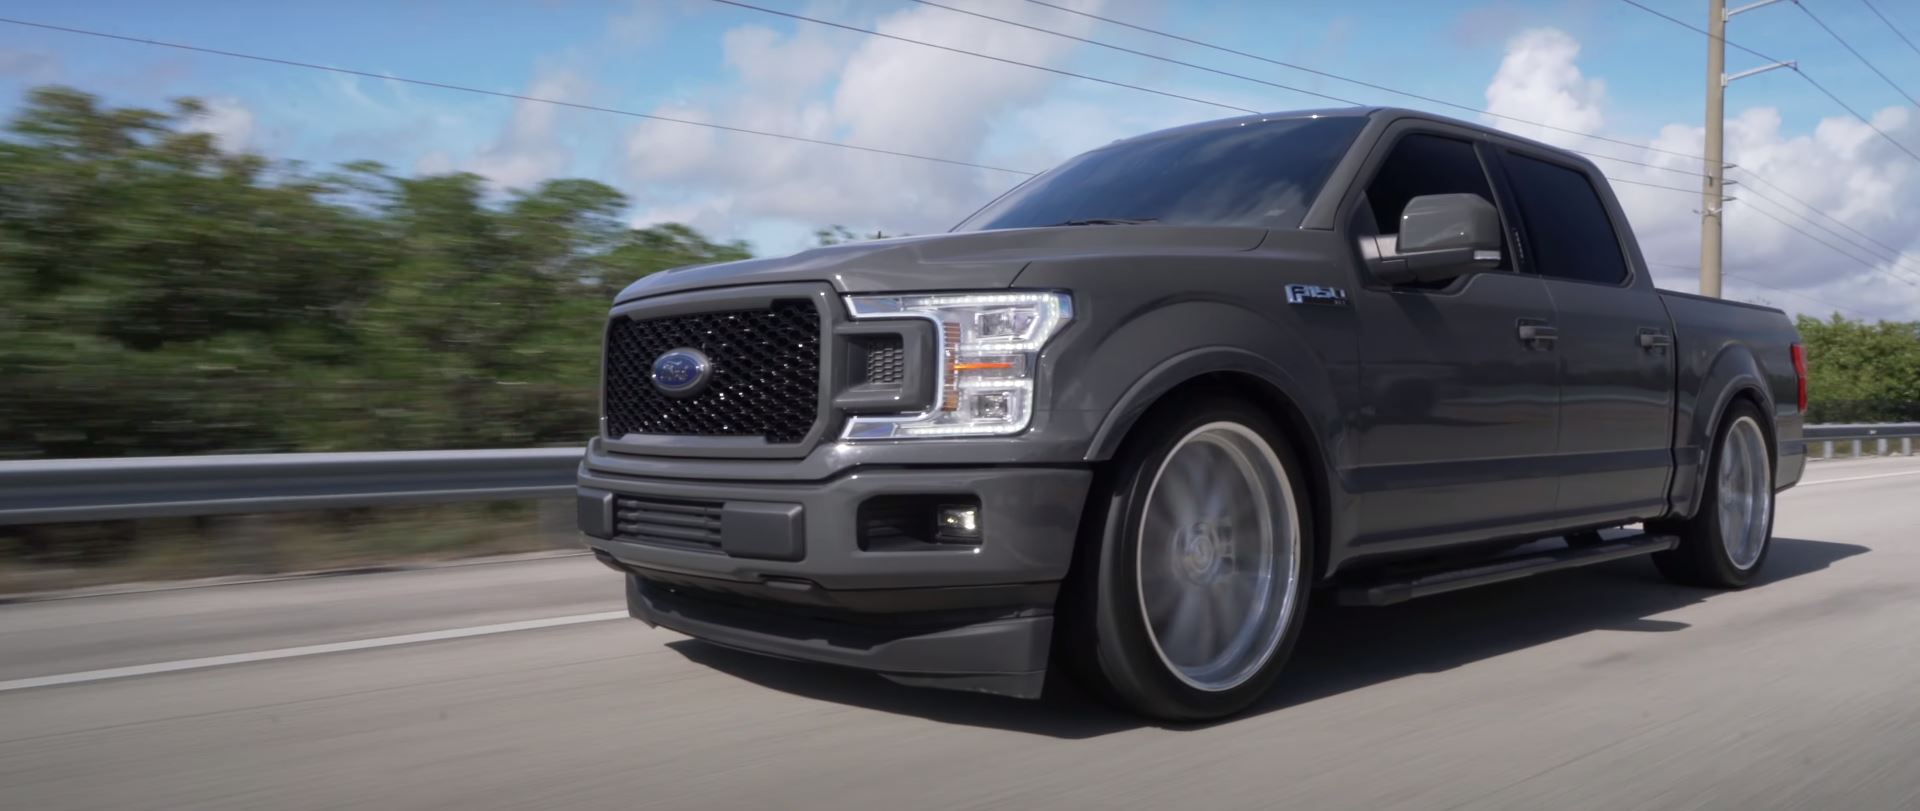 2019 F-150 Goes Into Full Stance Mode With 24-Inch Looks Dope -